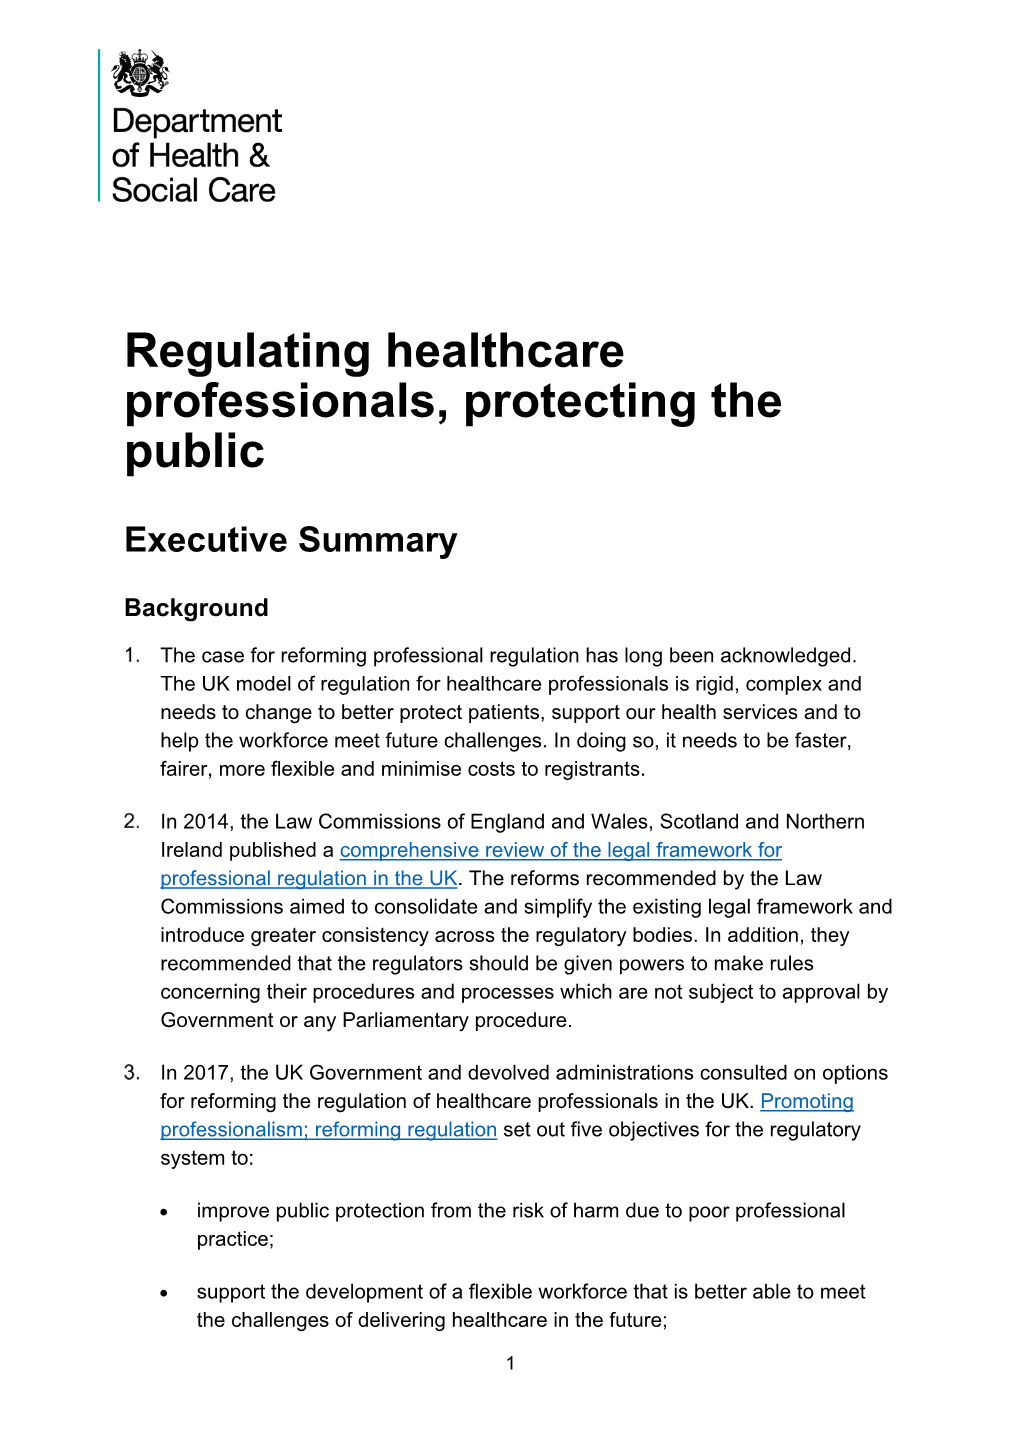 Regulating Healthcare Professionals, Protecting the Public